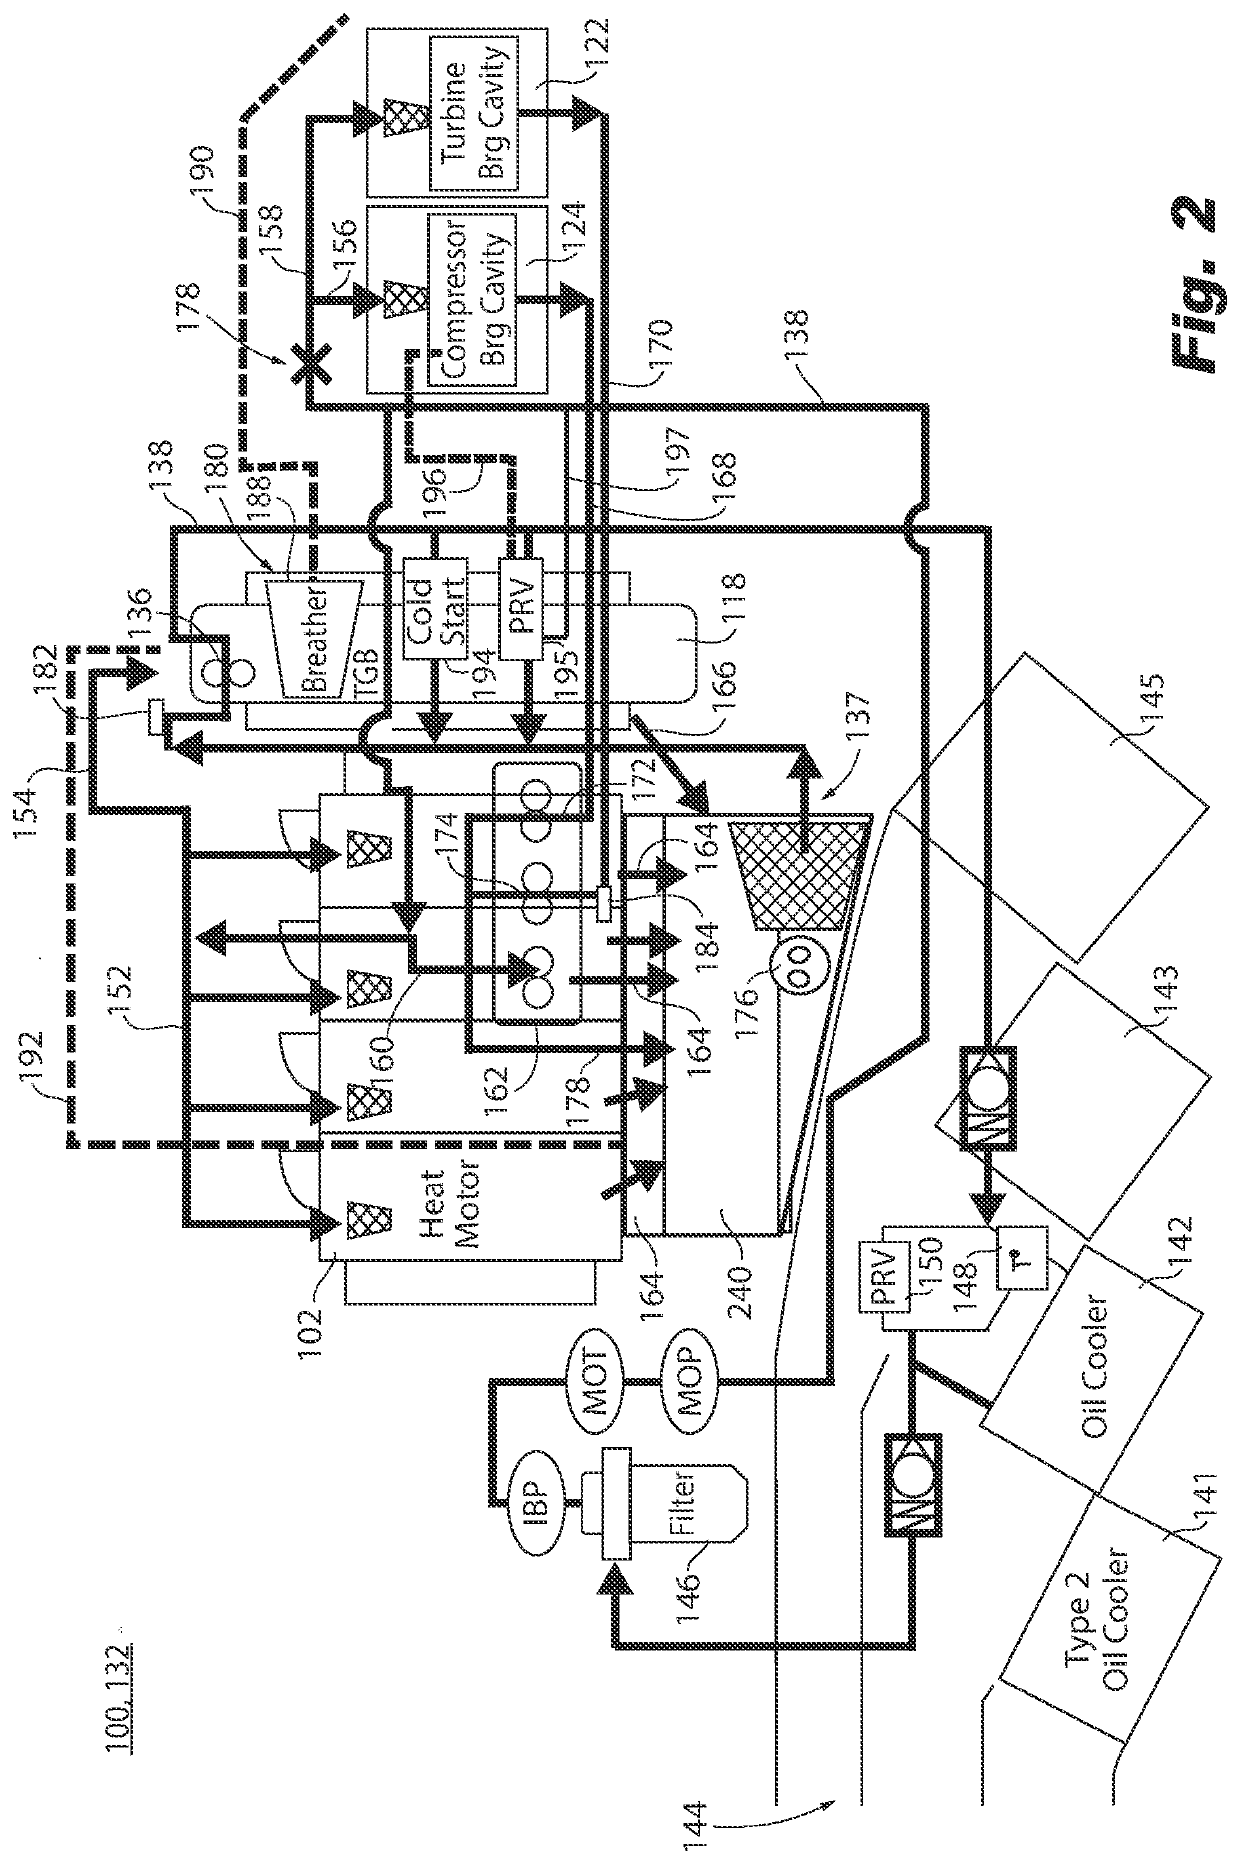 Circulating coolant fluid in hybrid electrical propulsion systems